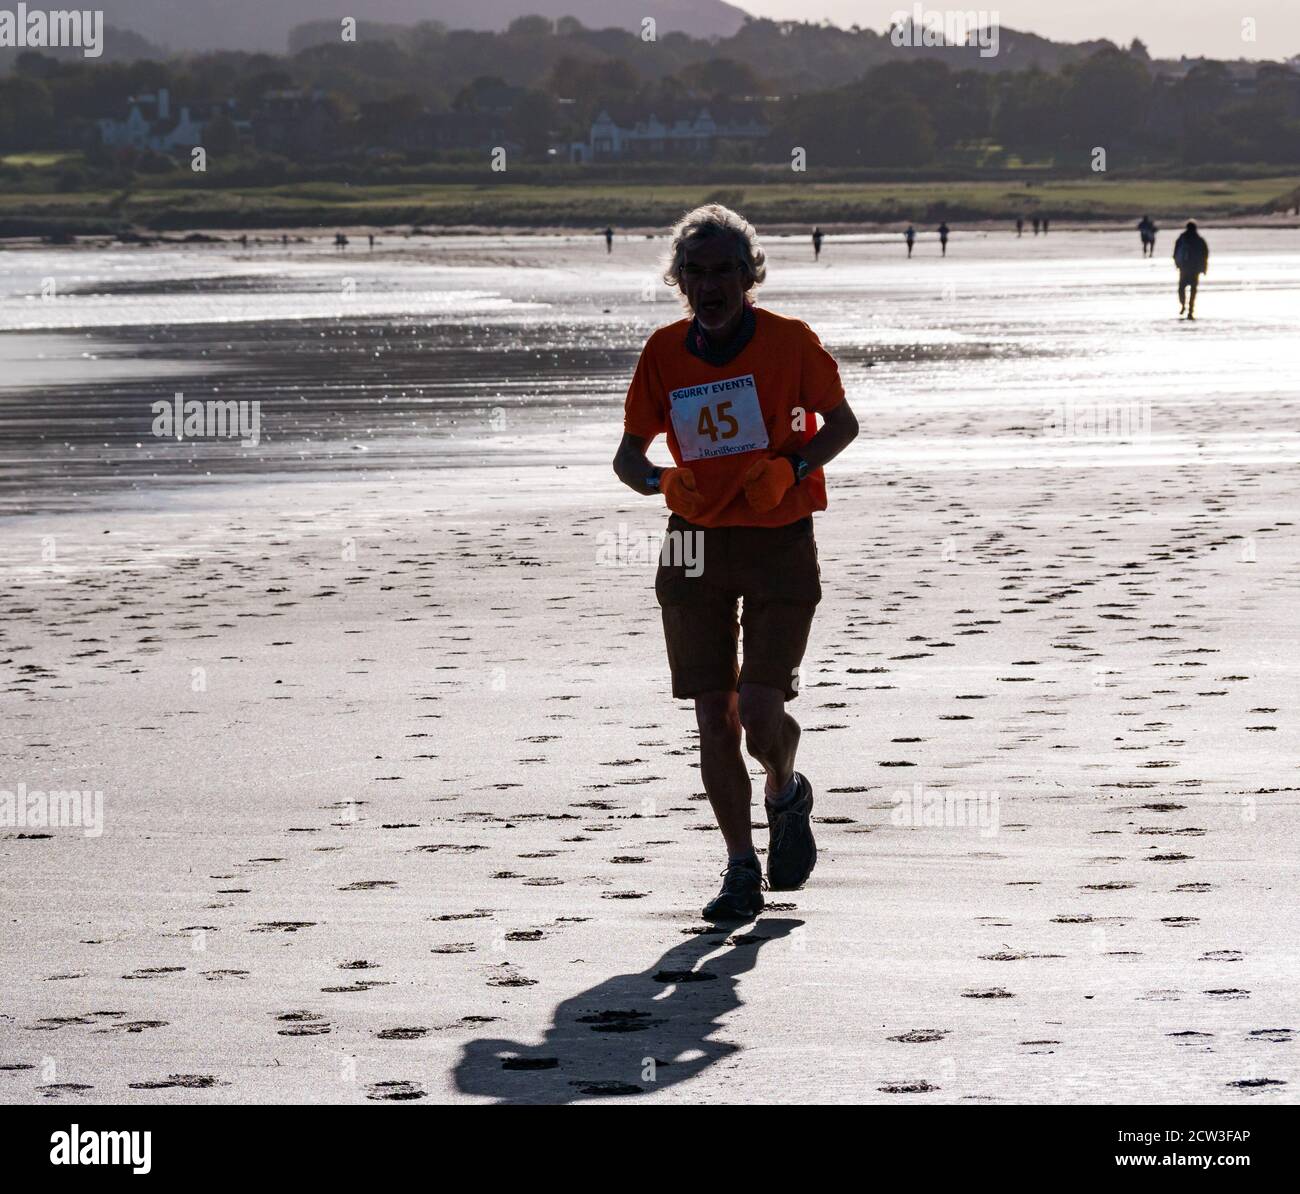 East Lothian, Scotland, United Kingdom, 27th September 2020. Scurry running event: Runners take part in a fun running event from Yellowcraig beach to North Berwick and back on a beautiful sunny Autumn morning. An older male runner on Broadsands beach Stock Photo